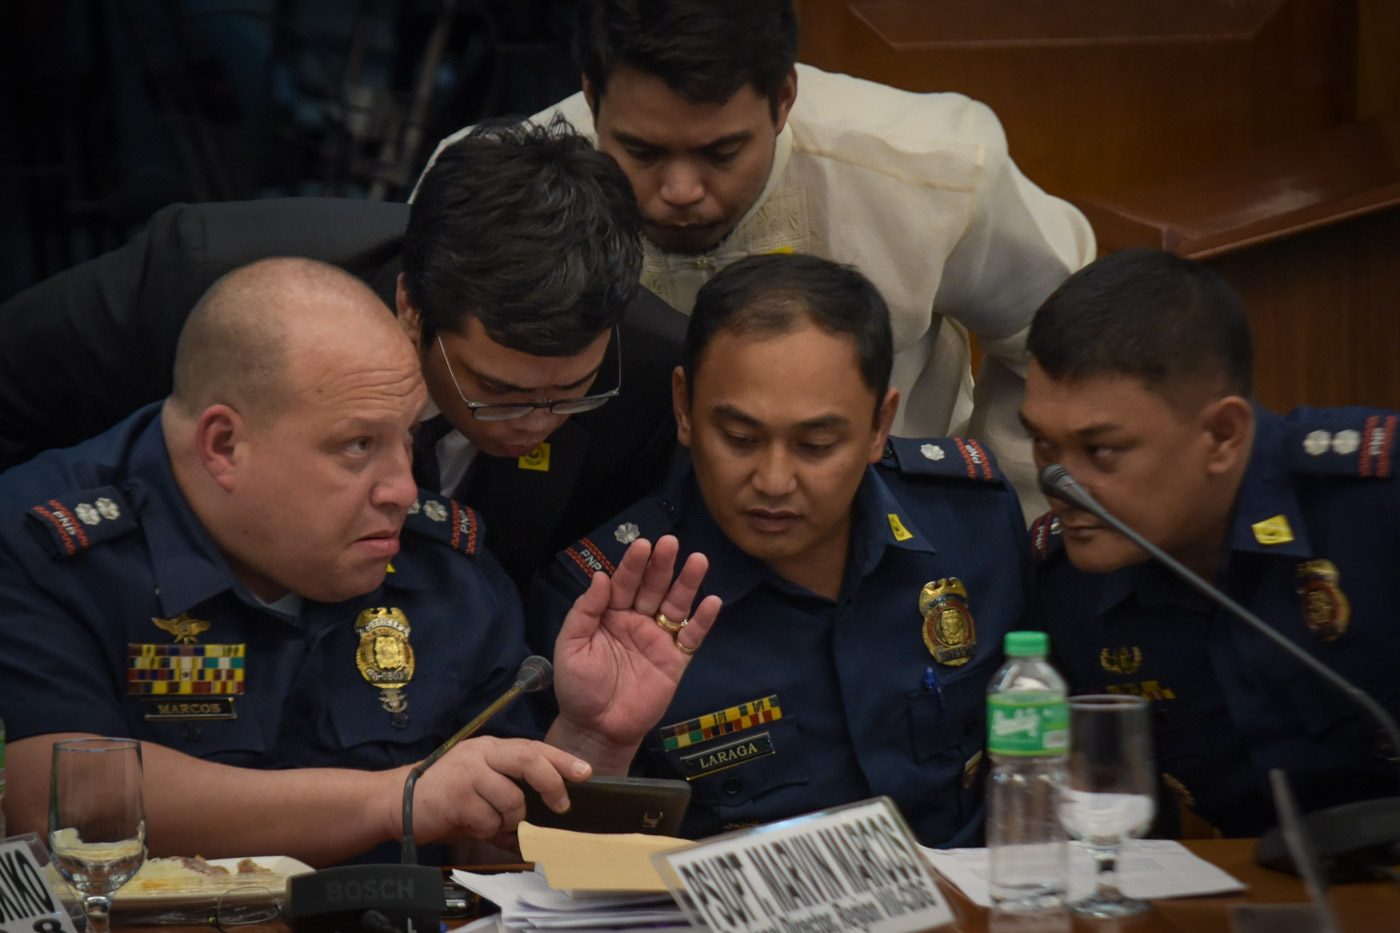 Leyte cops called SOCO an hour before Espinosa killing